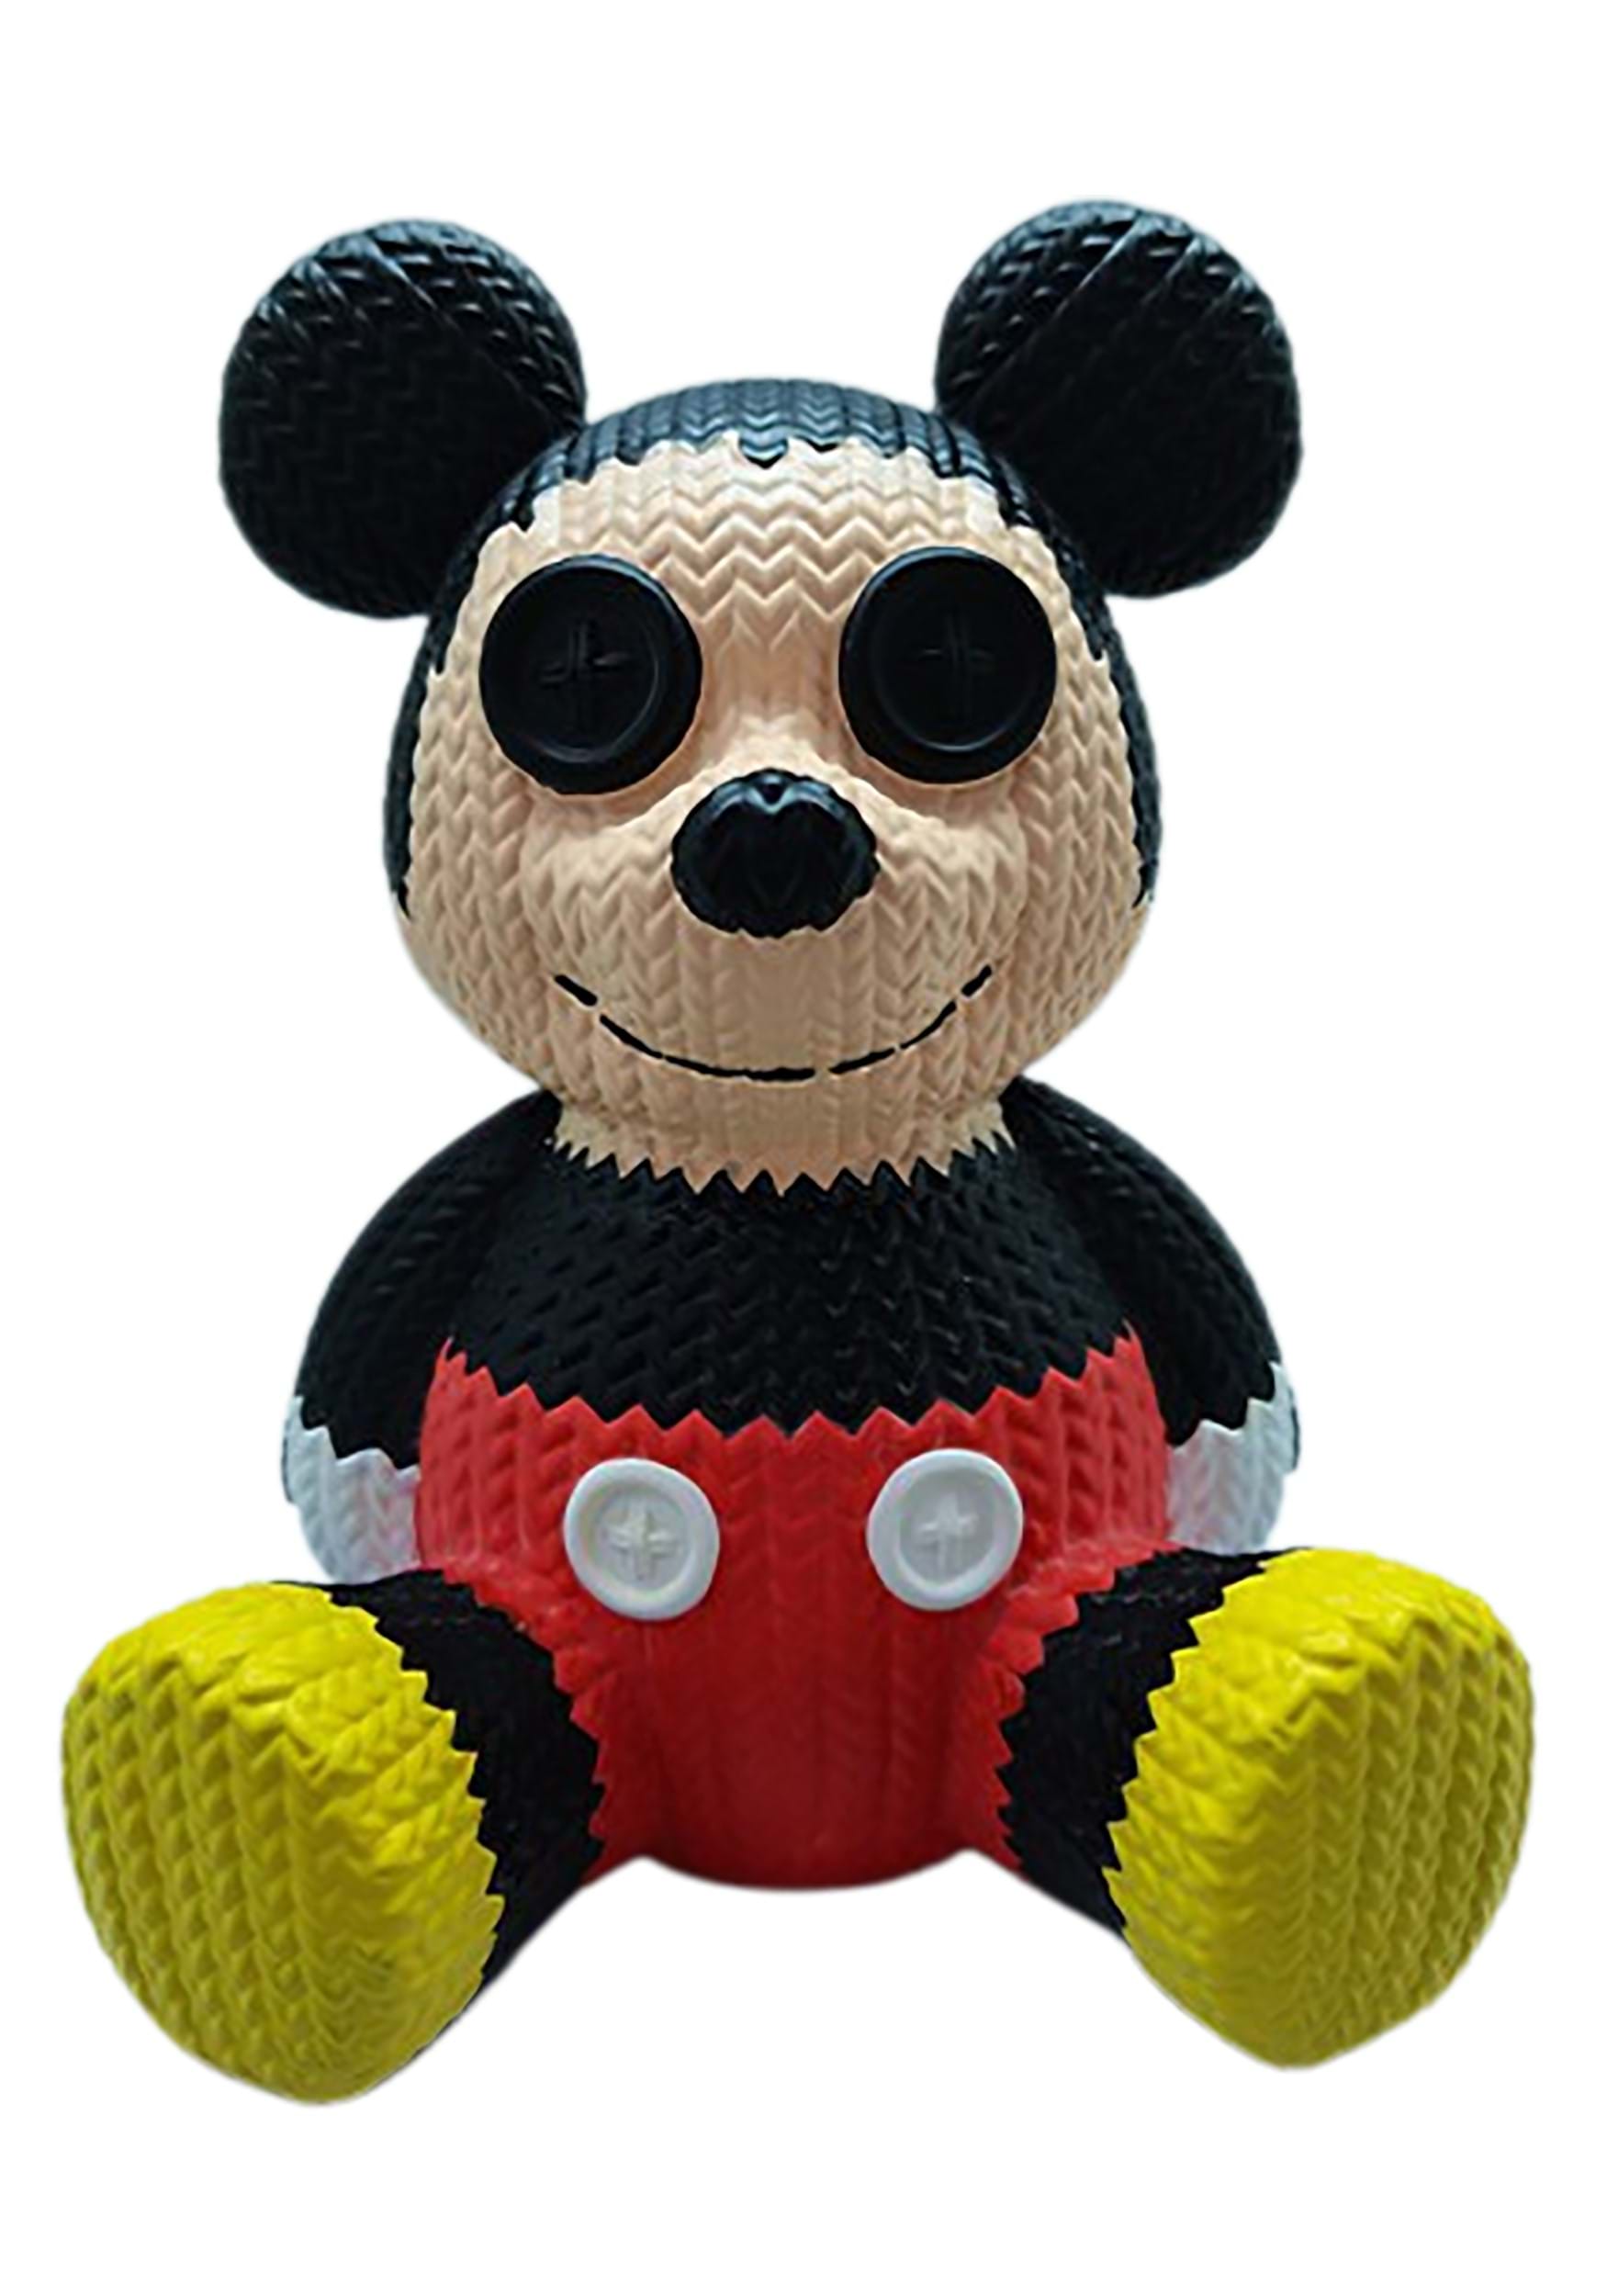 Mickey Mouse Handmade by Robots Figure